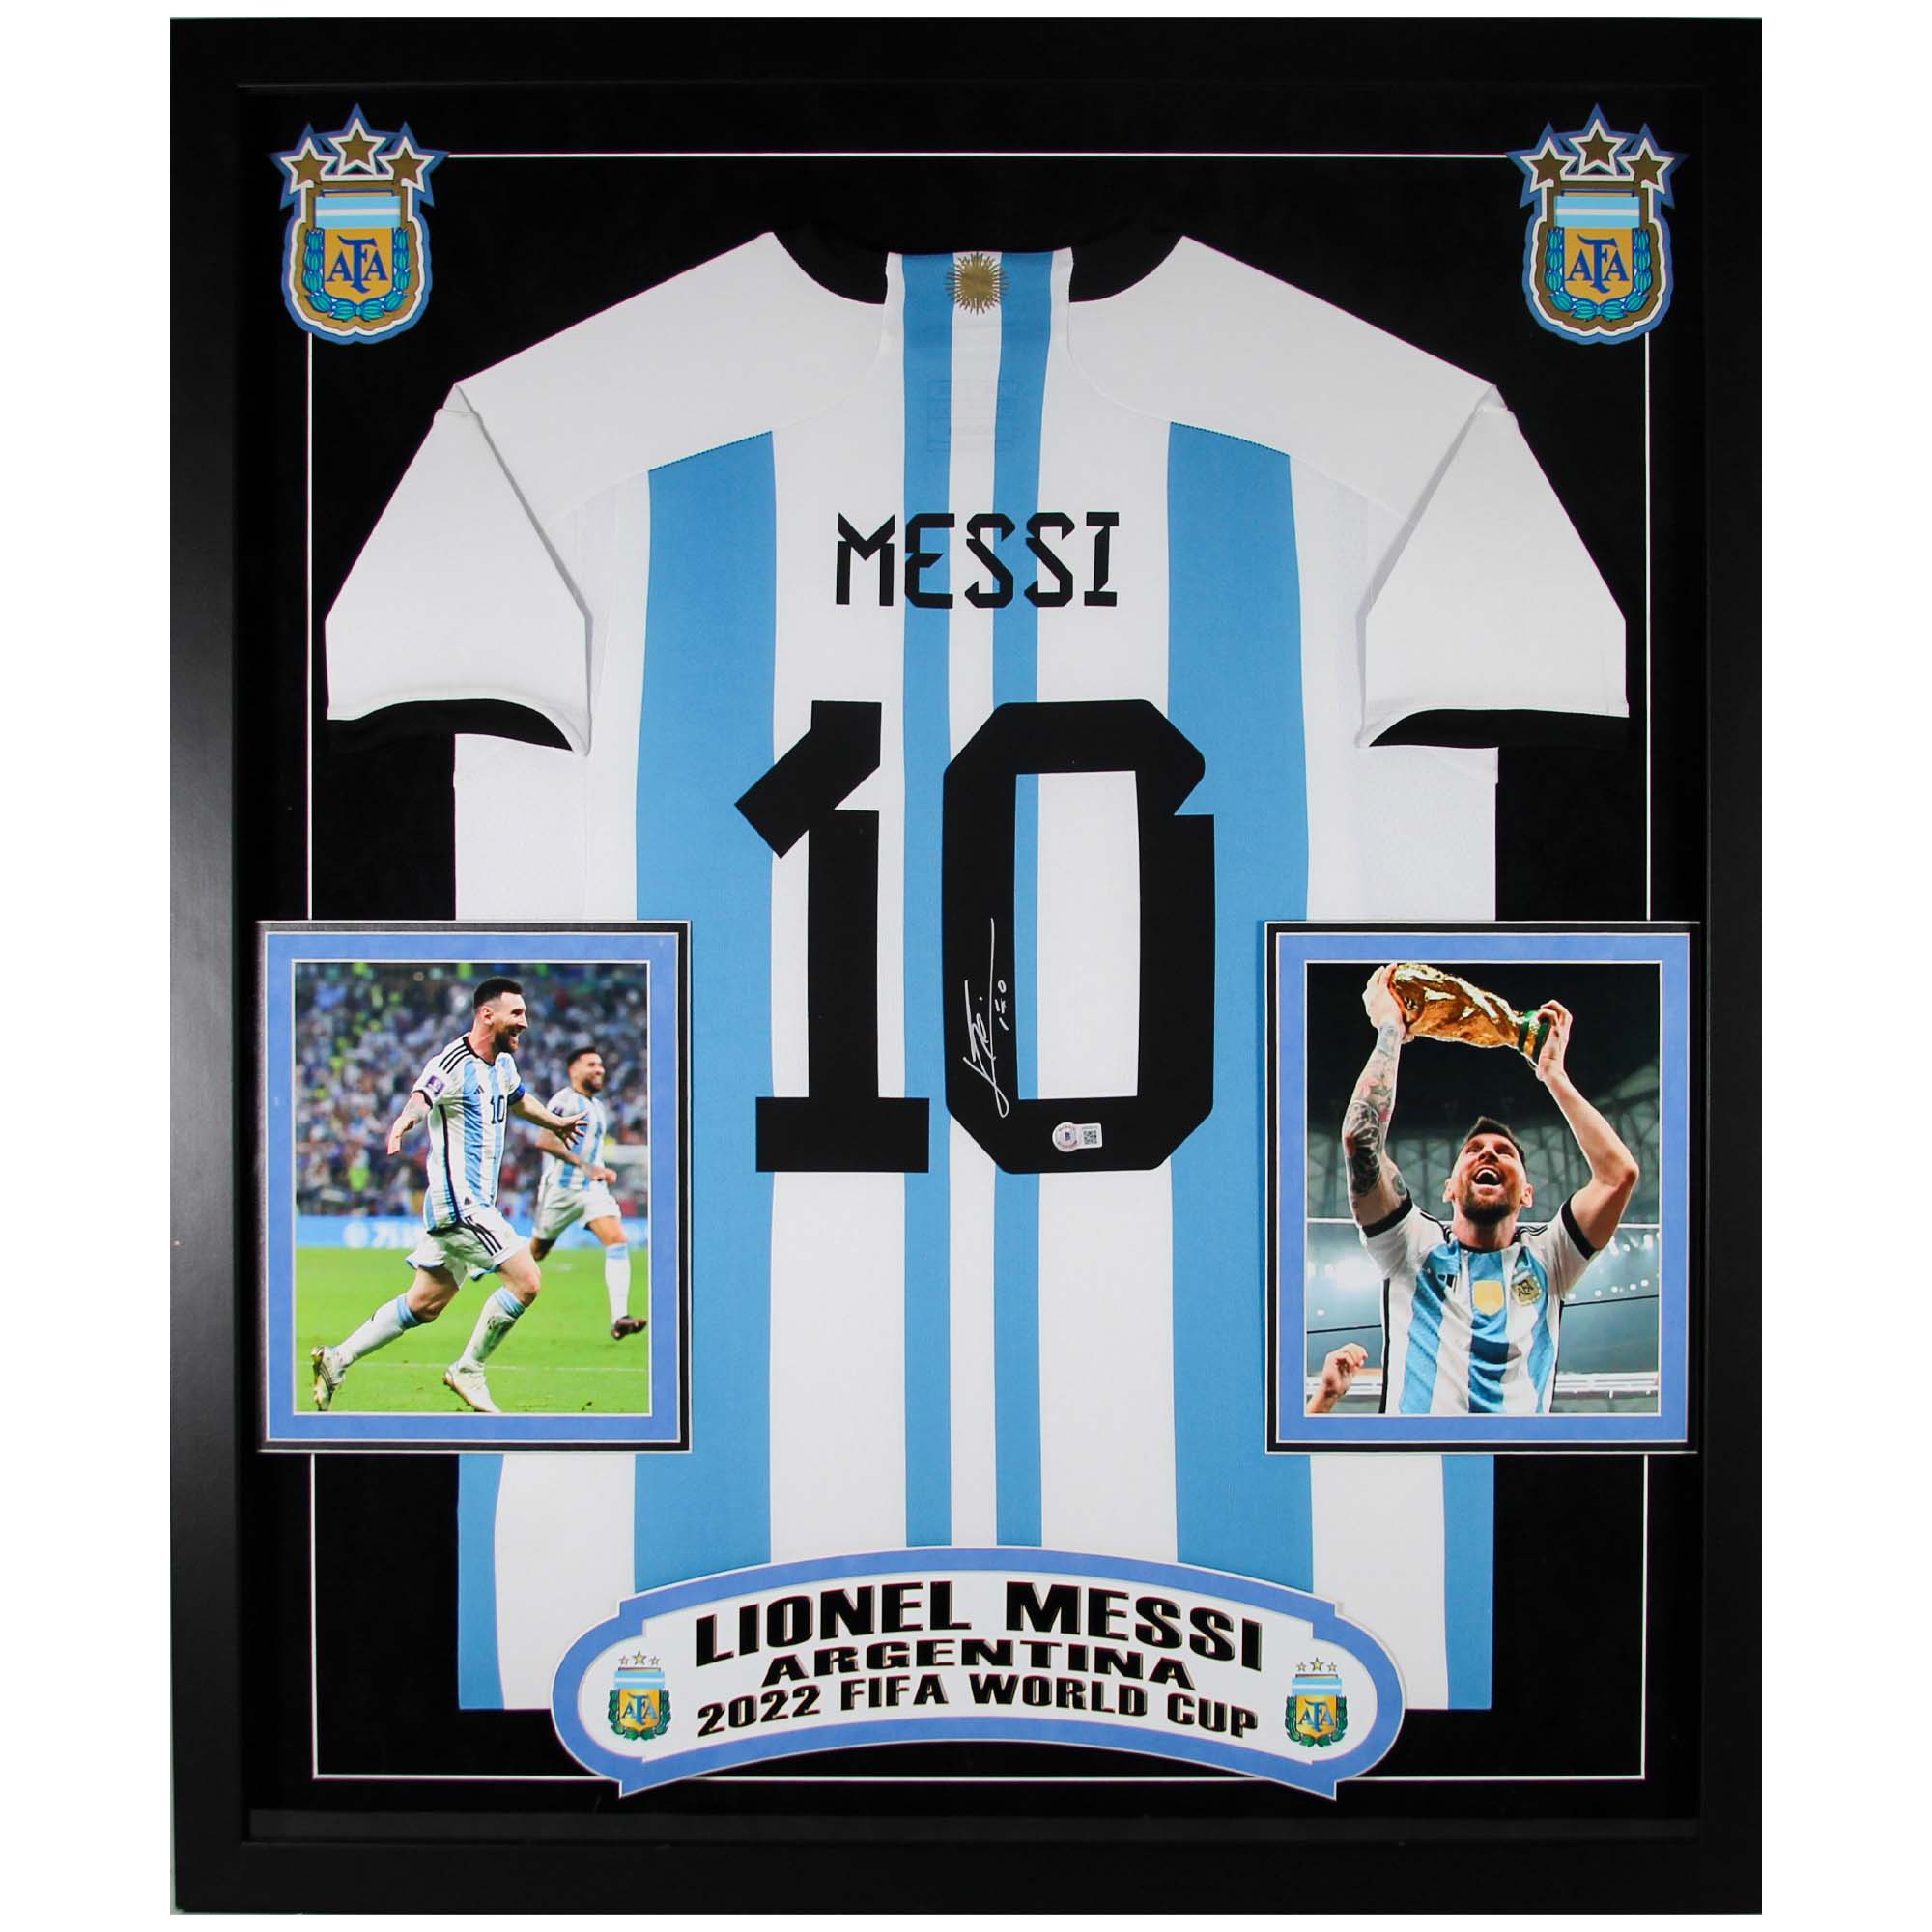 lionel messi jersey sold by